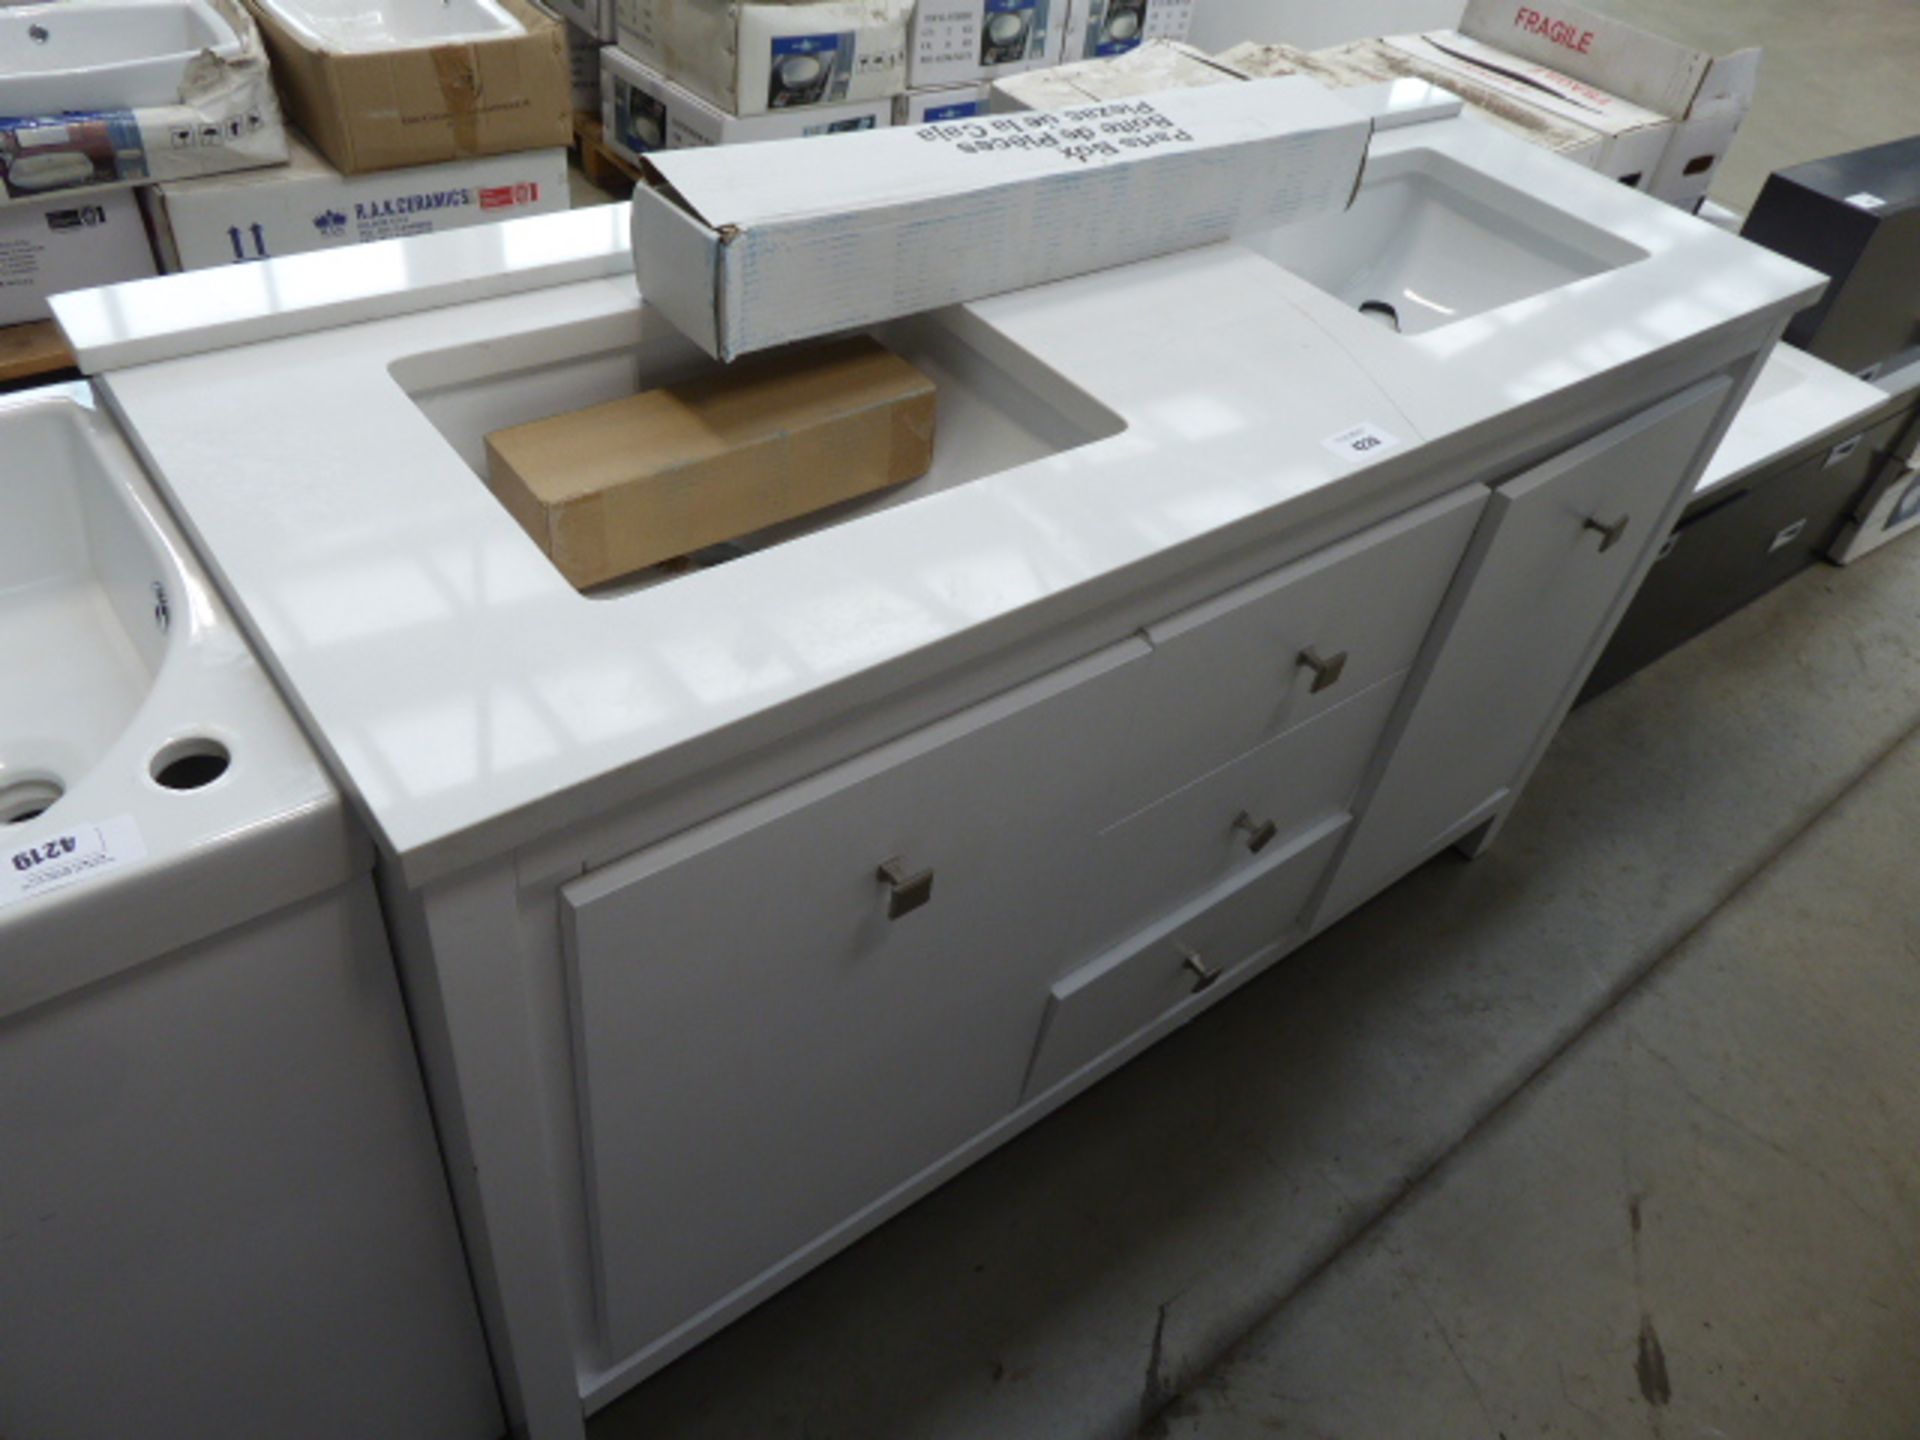 His and hers sink in white, stone effect on high gloss white vanity unit